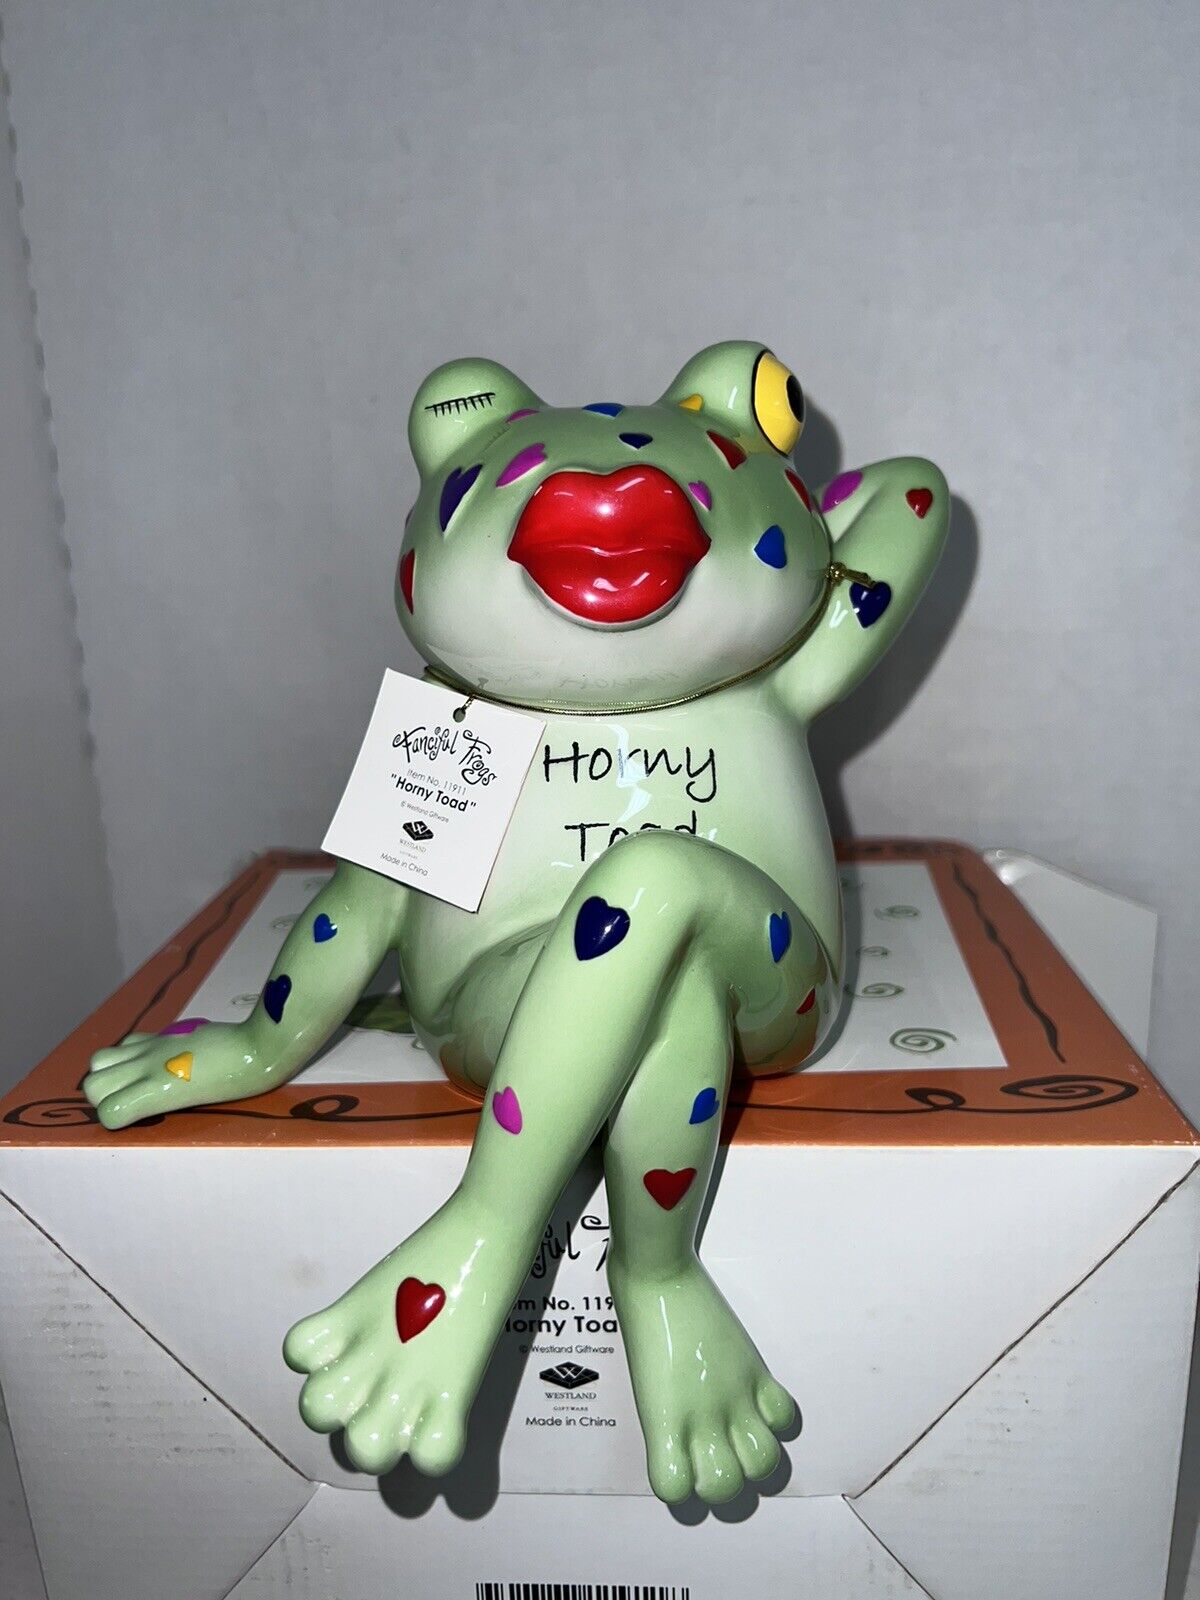 Westland Fanciful Frogs #11912 “Horny Toad” Whimsical Glass Figurine With Hearts